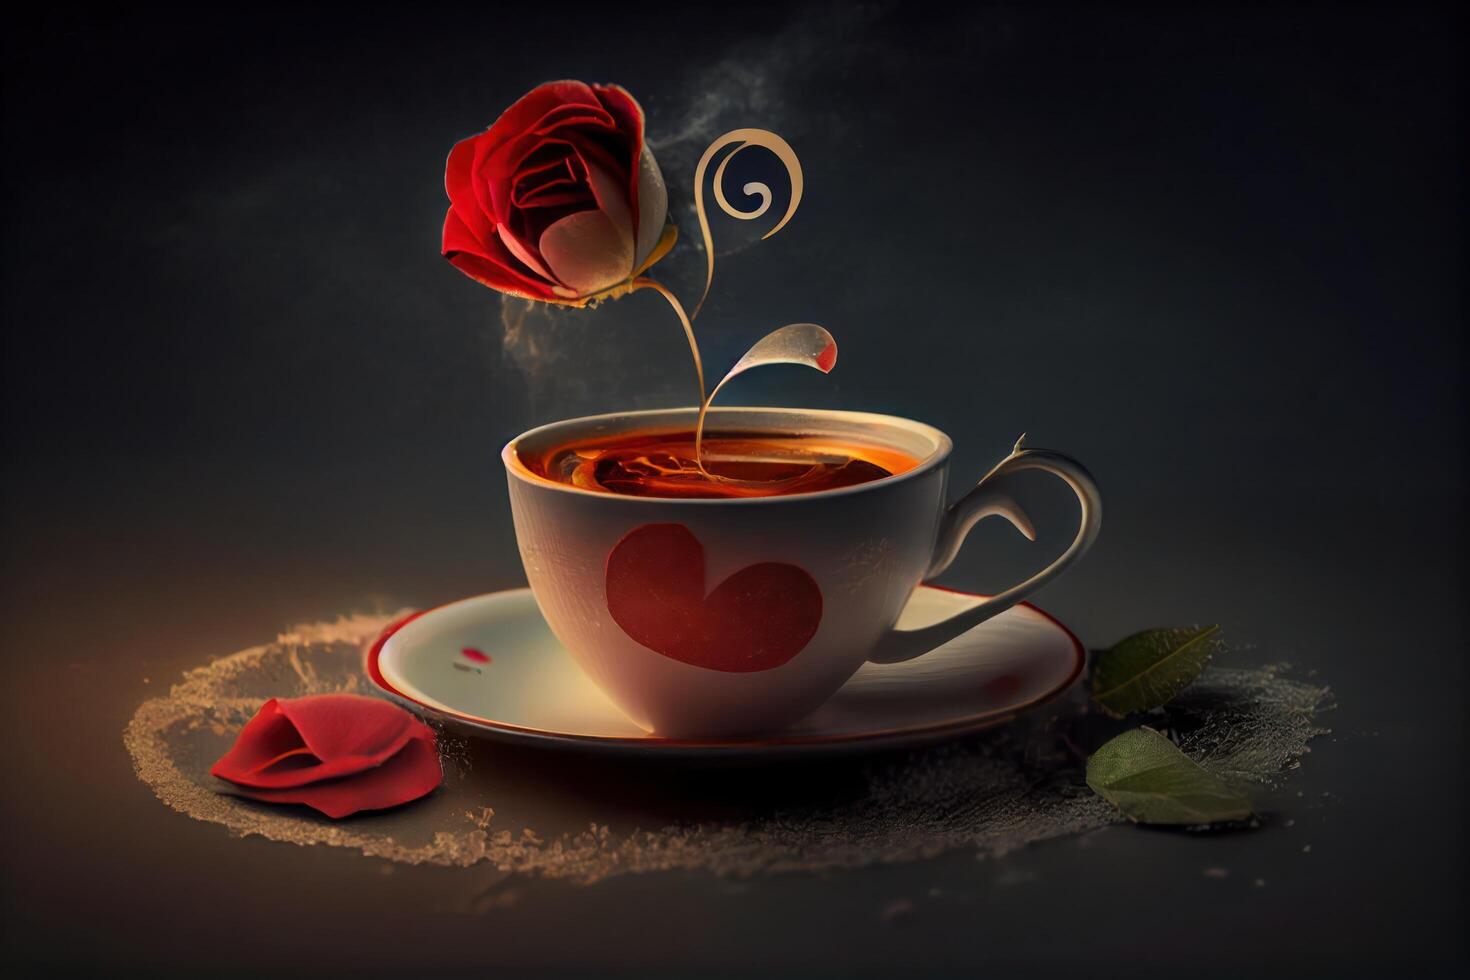 single red rose in a tea cup, with a tea bag shaped like a heart floating in the steaming tea . photo